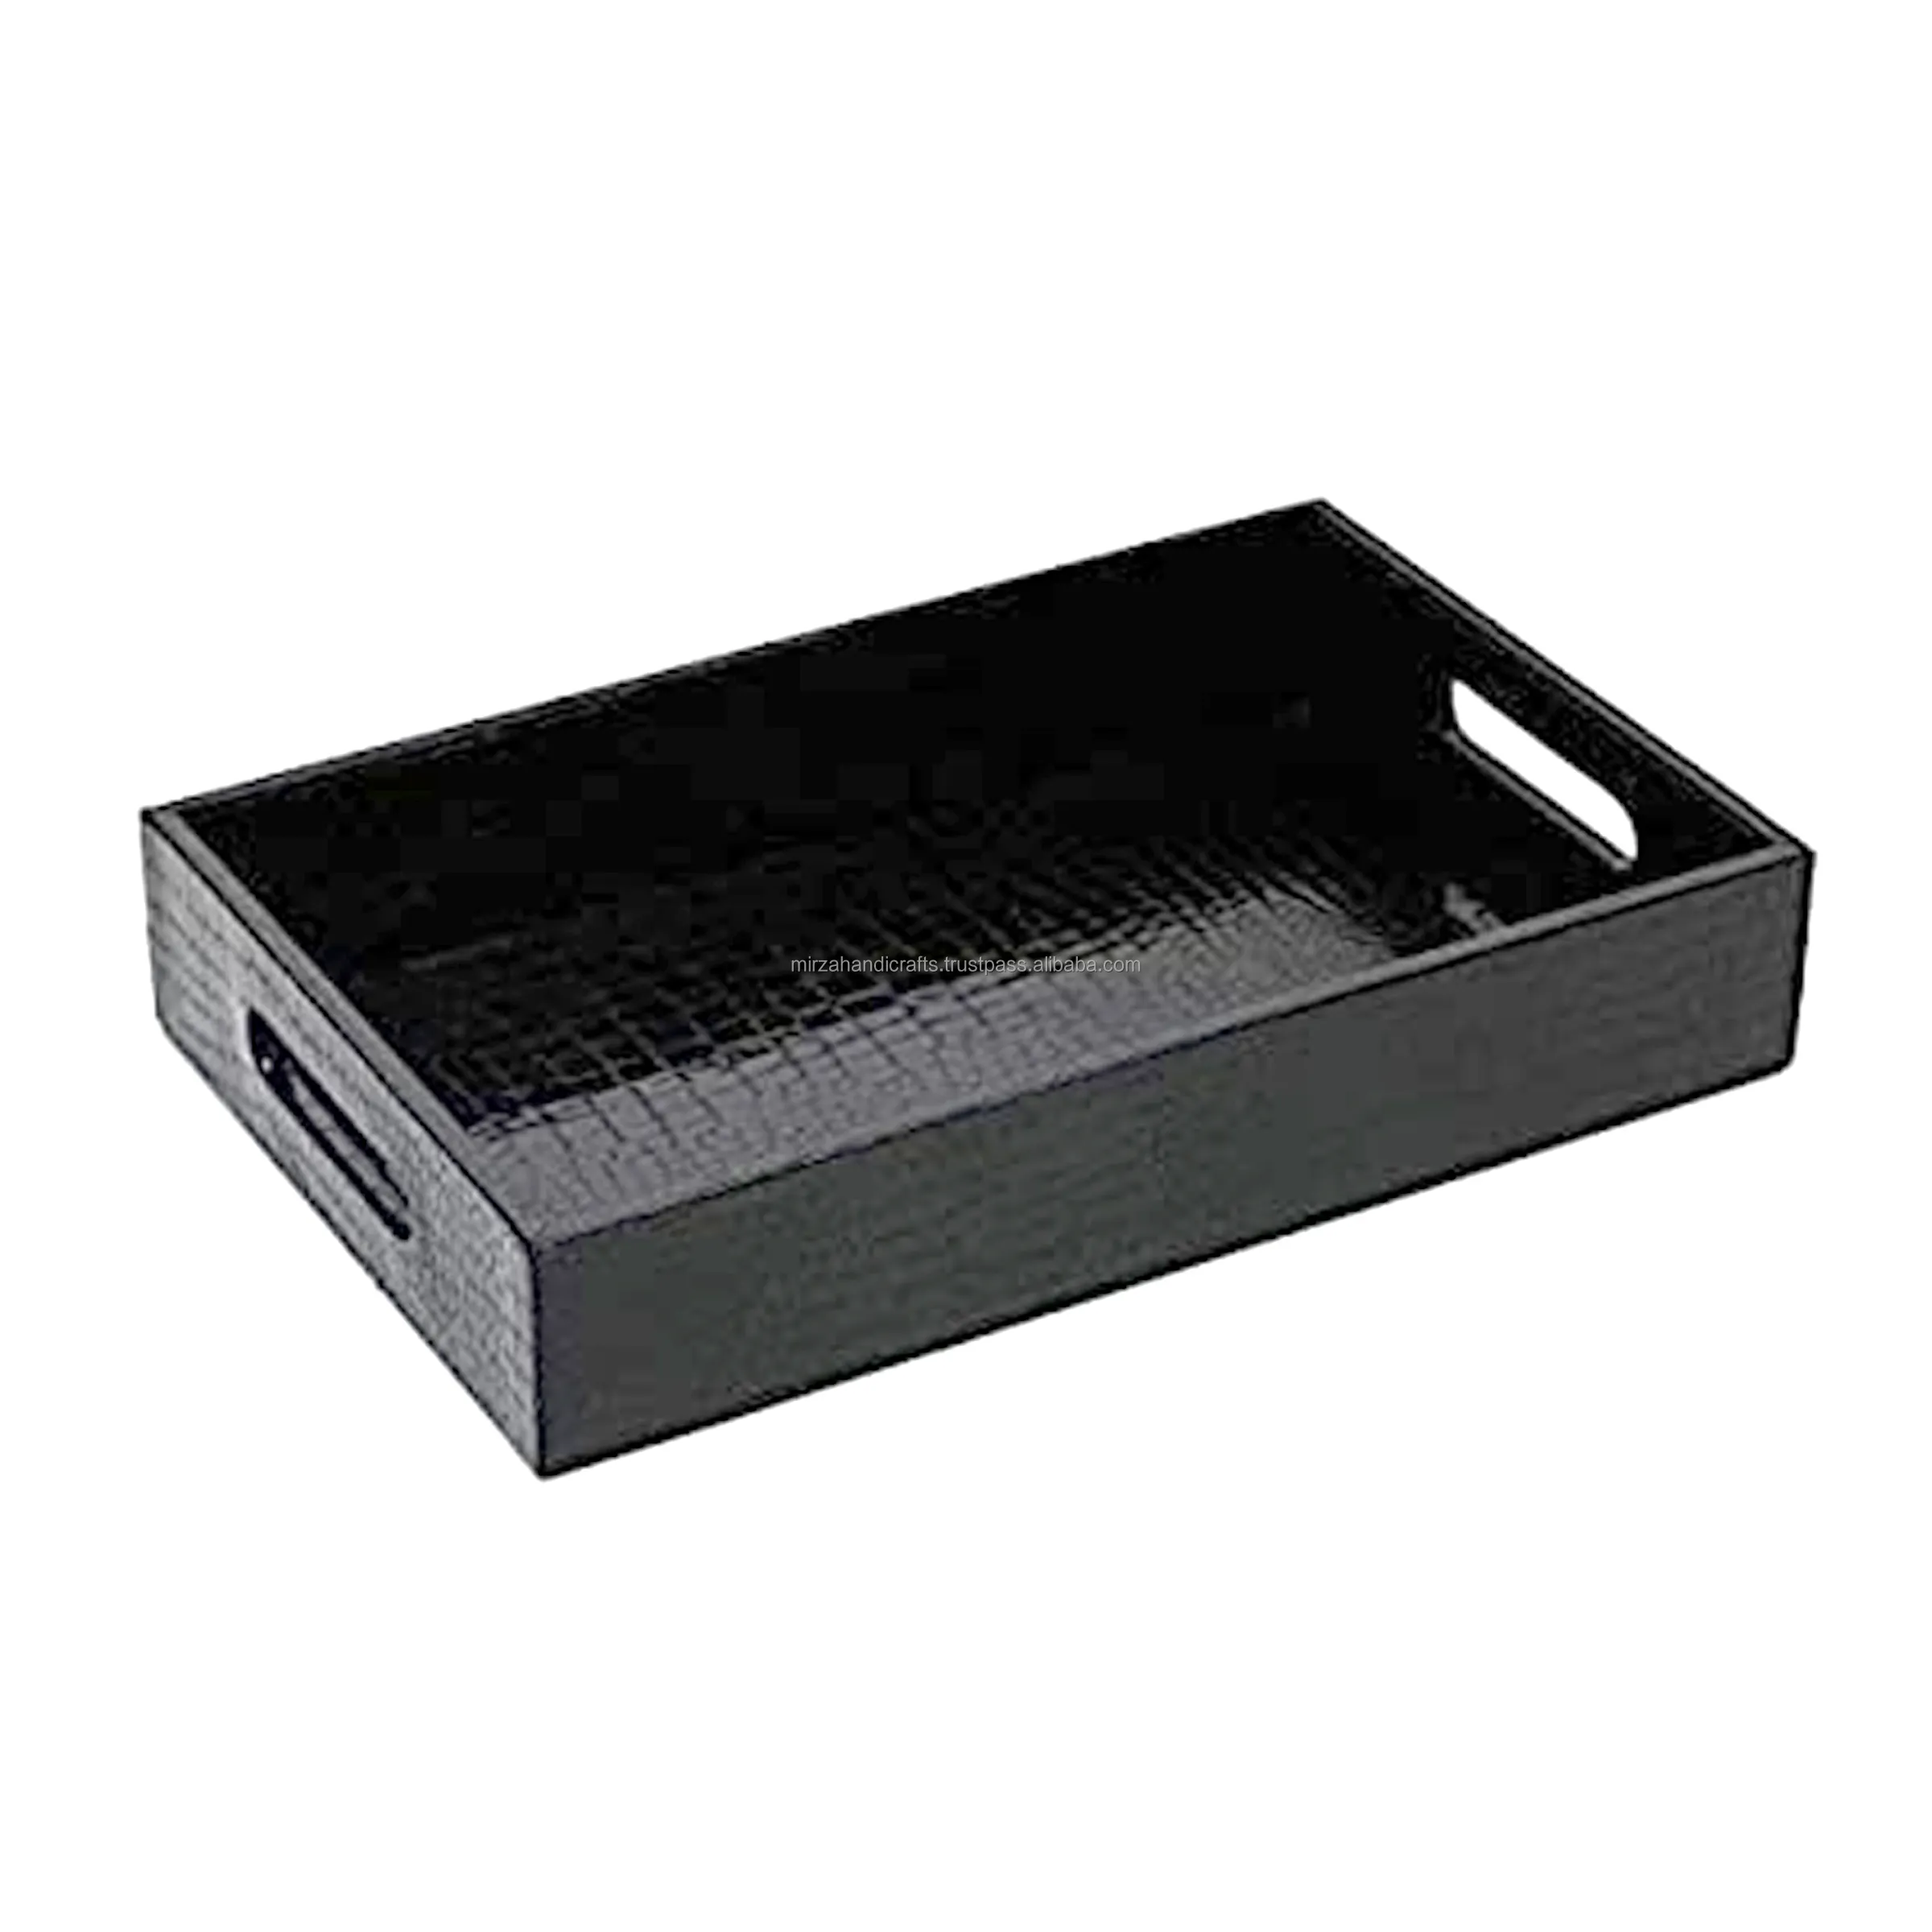 Modern Rectangular Matte Black Lather Serving Tray with Handles Perfect for Dining Table Parties Storage Home decor